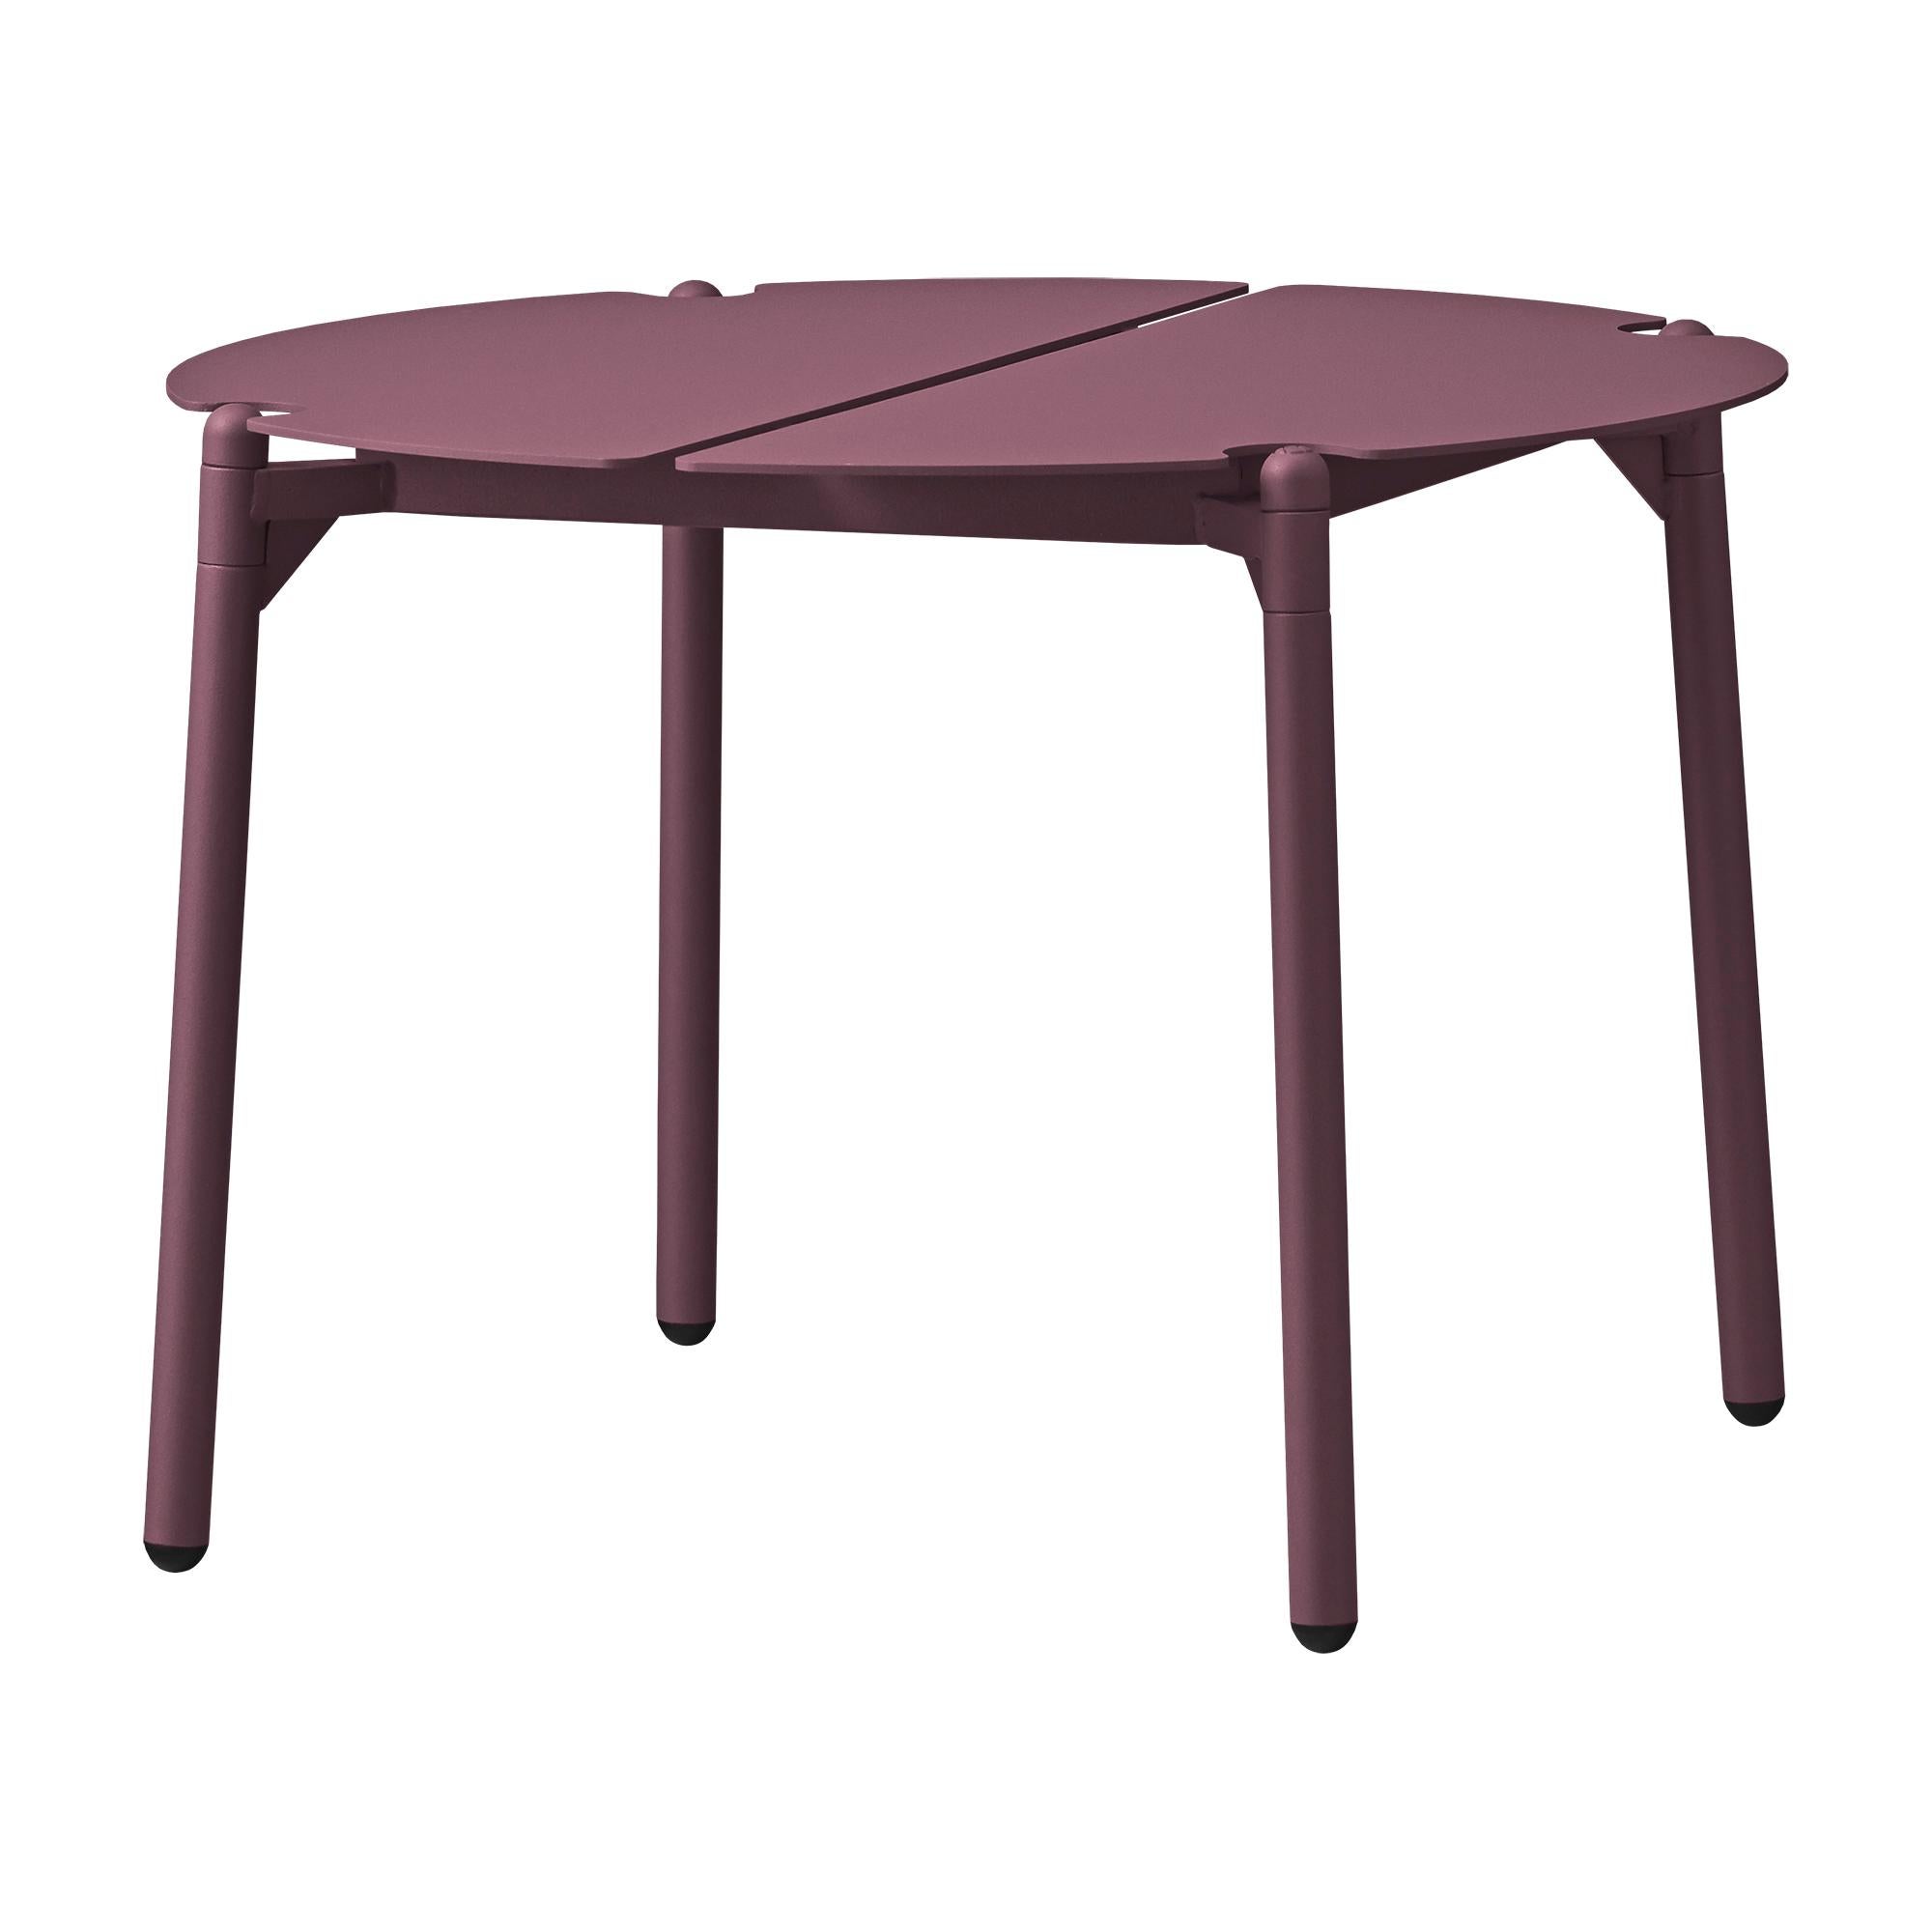 Small bordeaux minimalist lounge table
Dimensions: Diameter 50 x height 35 cm 
Materials: Steel w. matte powder coating & aluminum w. matte powder coating.
Available in colors: Taupe, bordeaux, forest, ginger bread, black and, black and